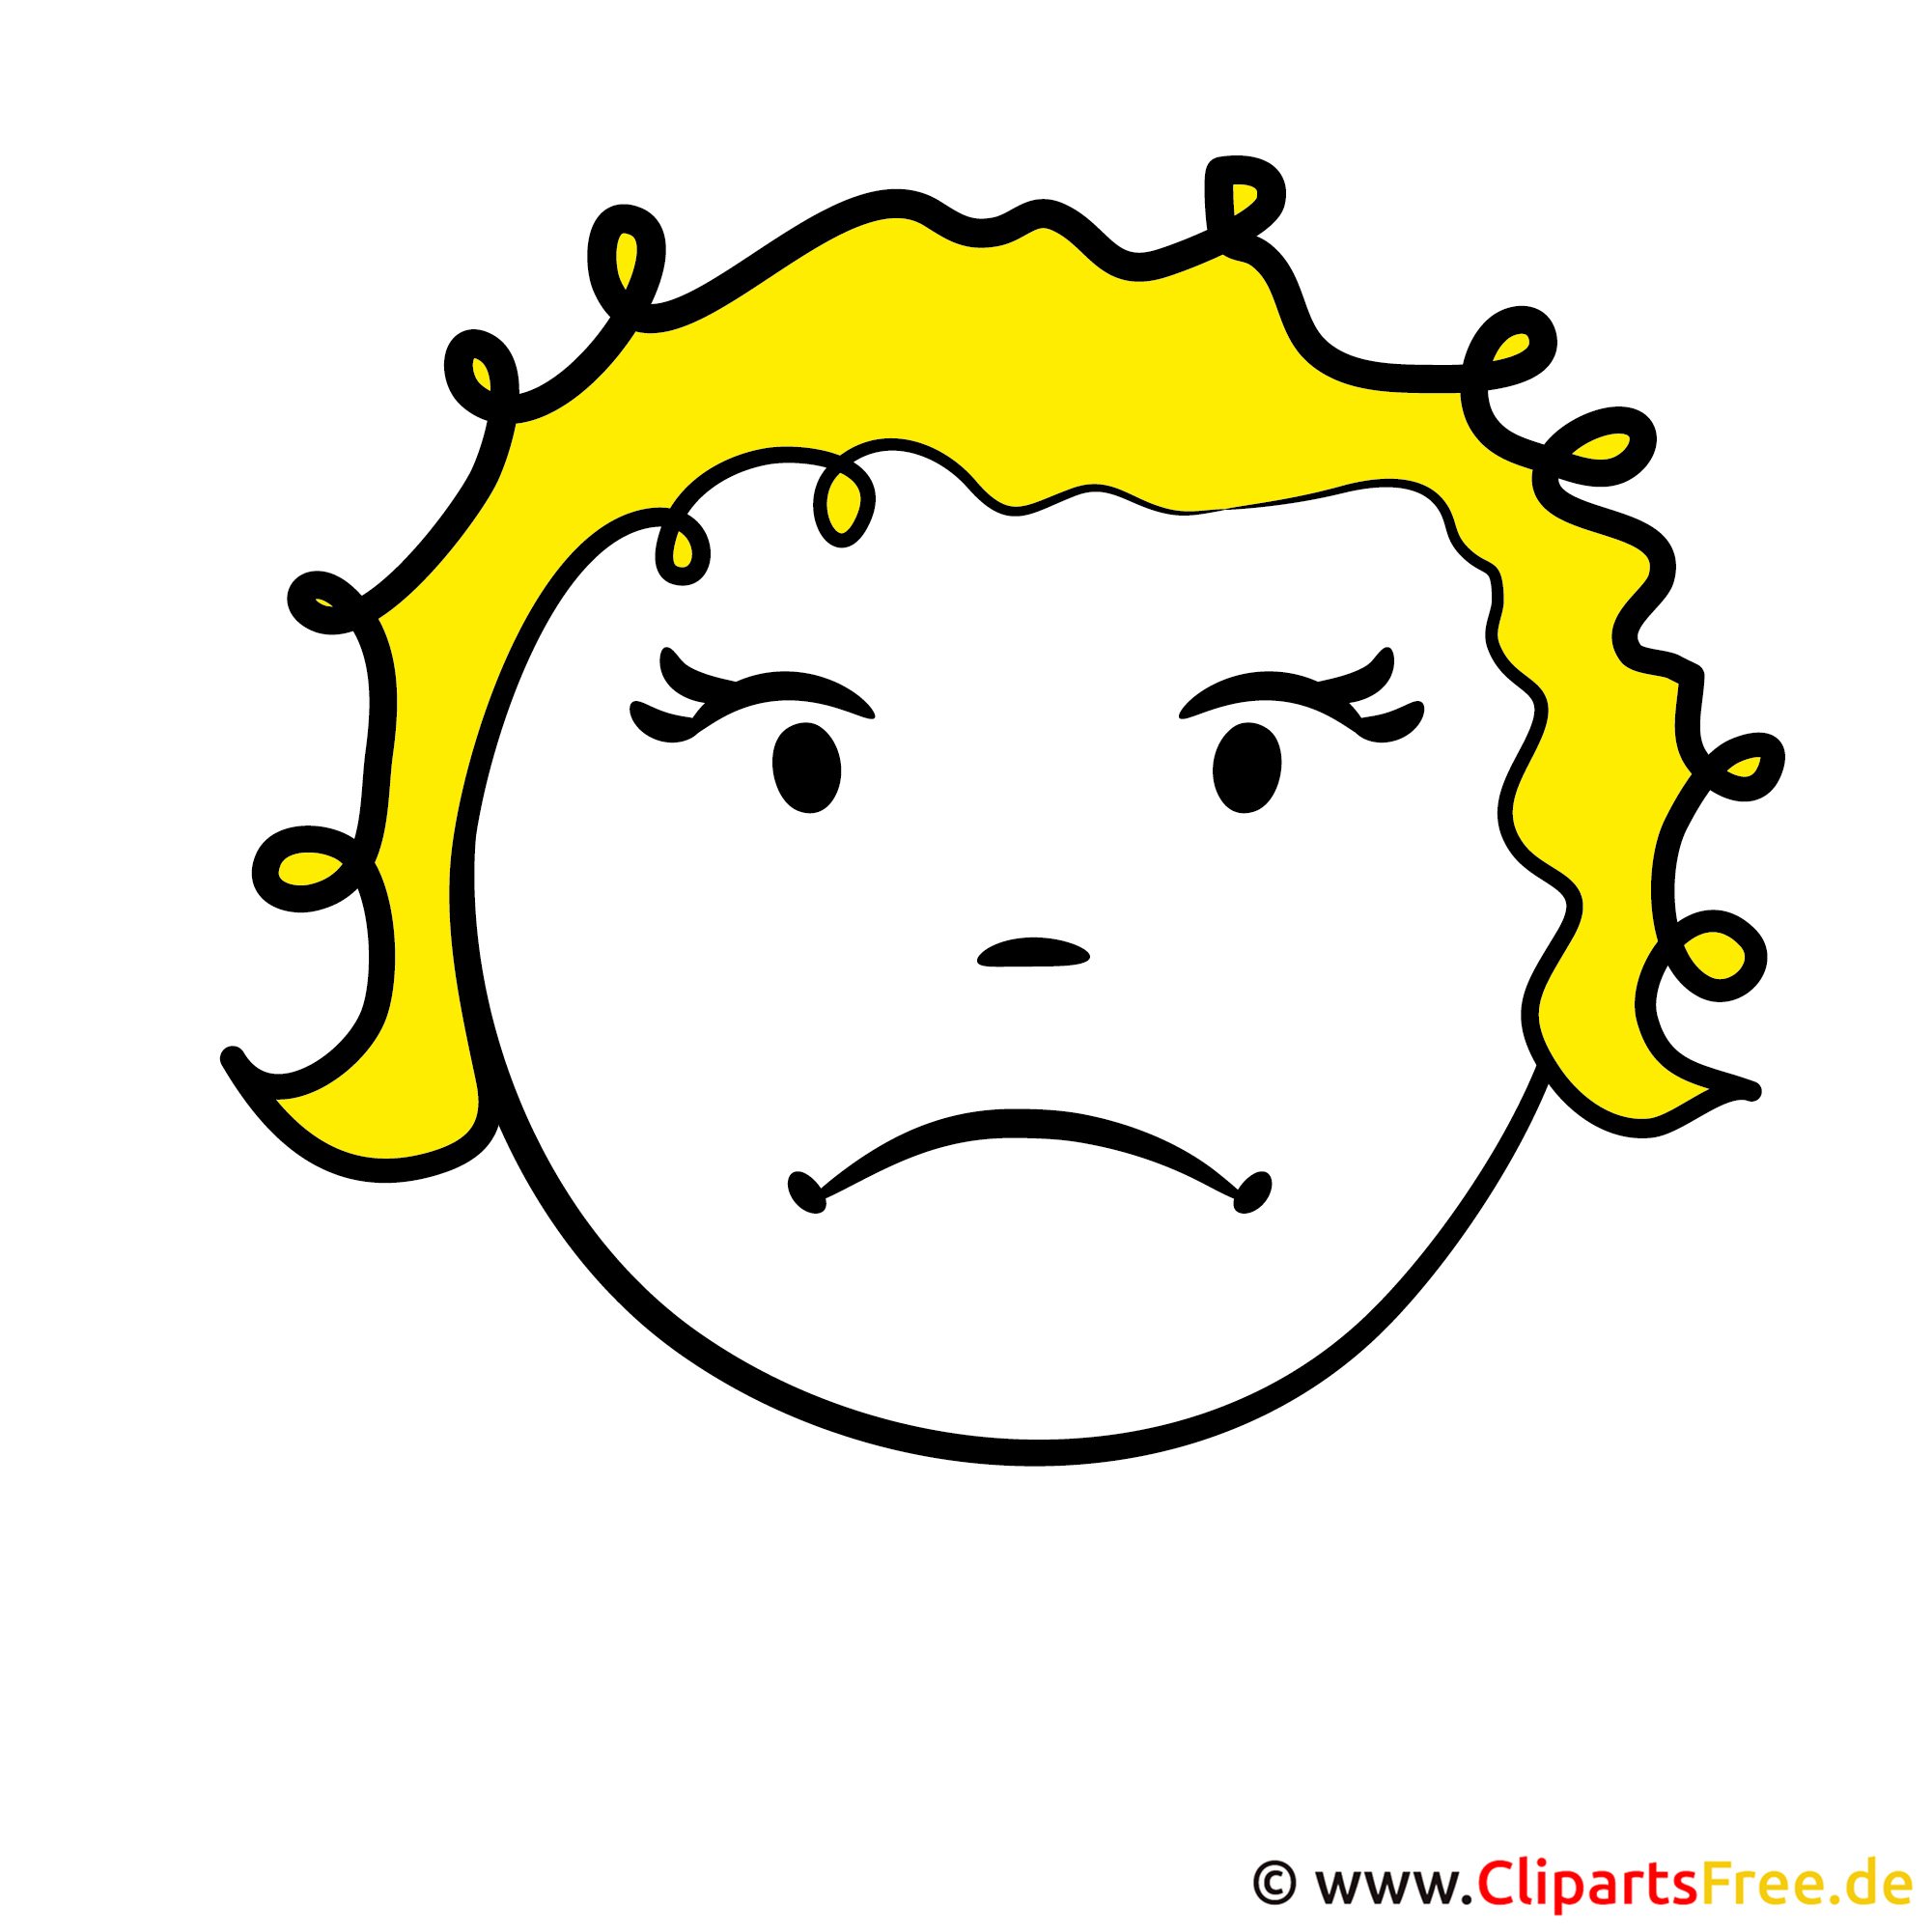 clipart smiley traurig - photo #9